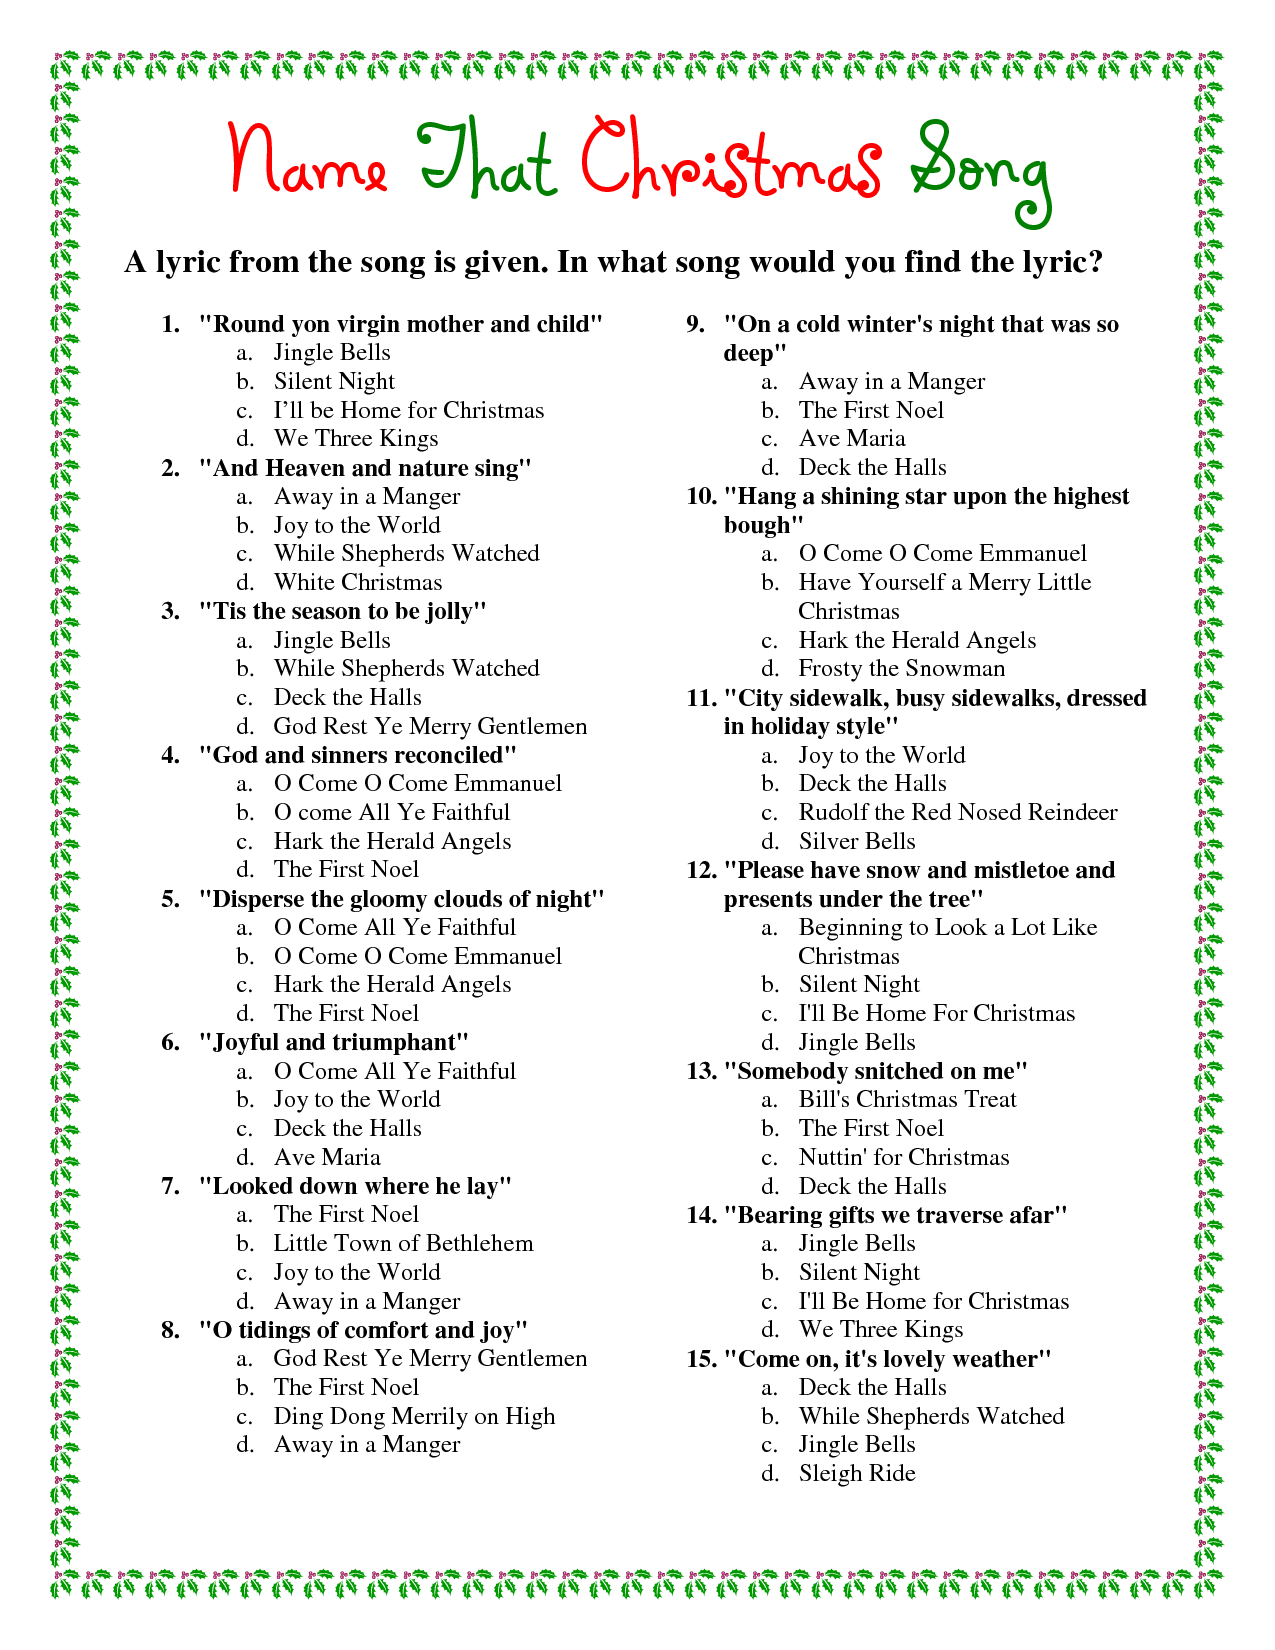 Christmas Songs Trivia Questions And Answers